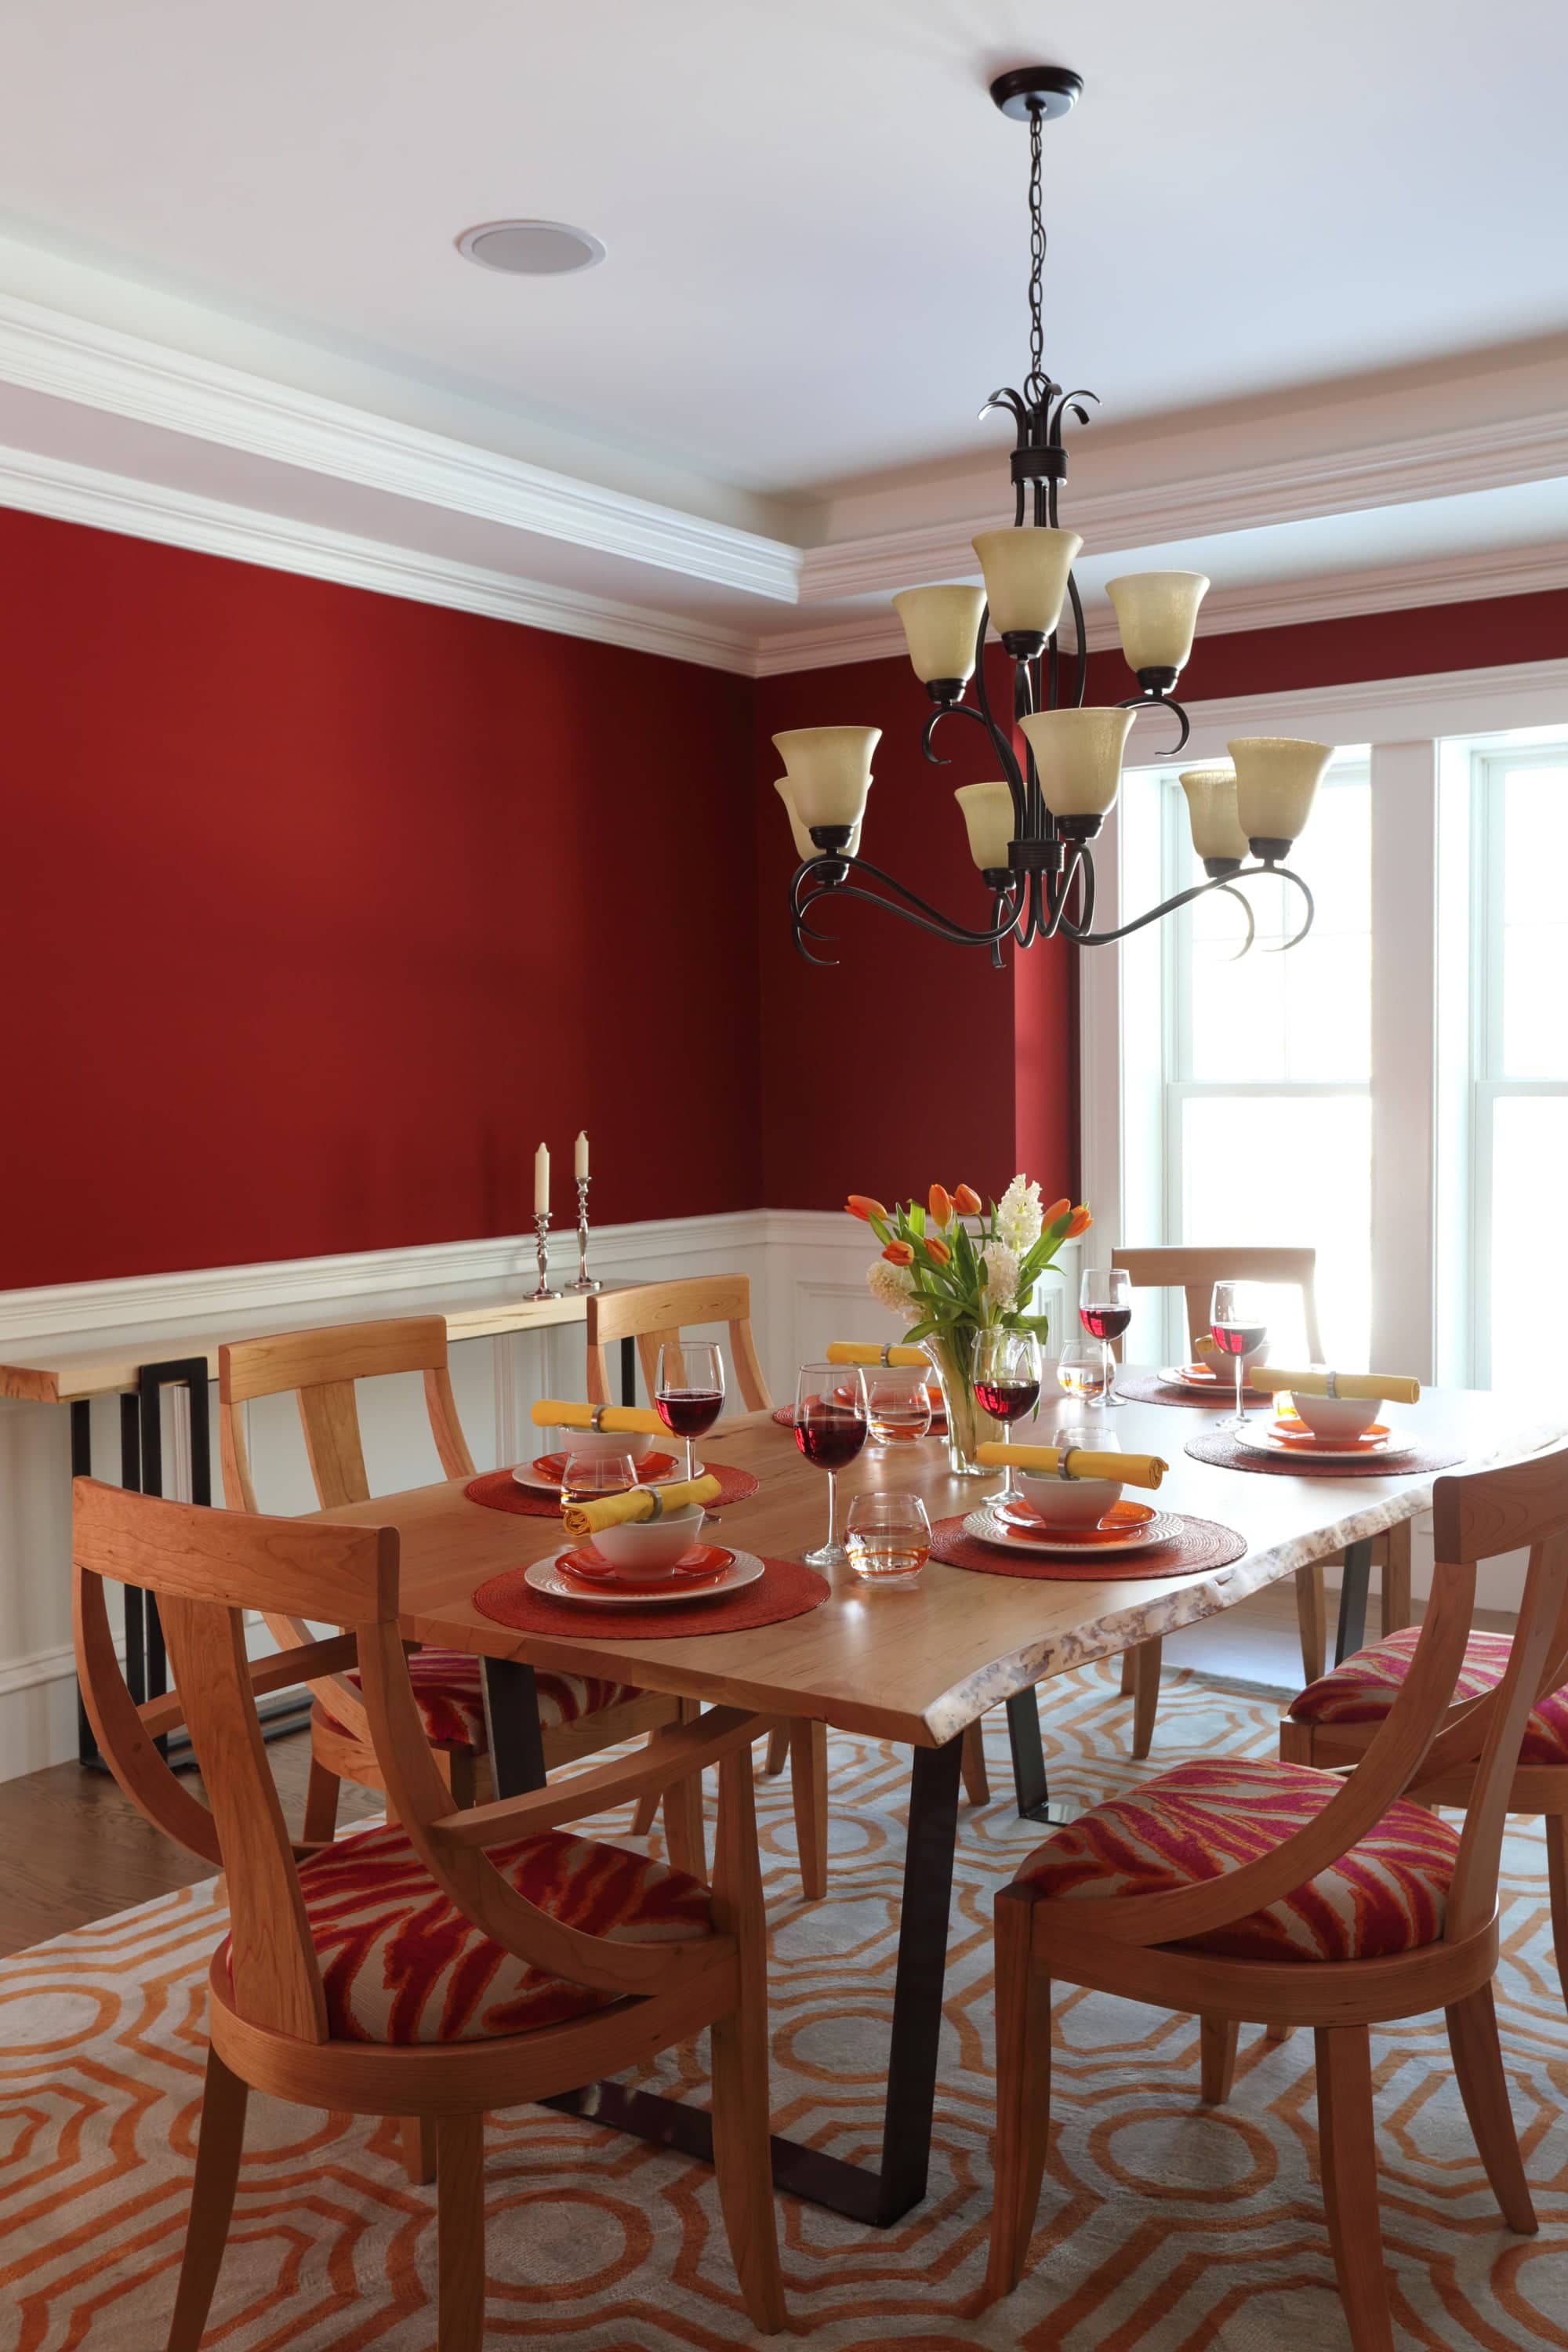 Circle Furniture - Dining Room Paint Colors: From Neutral to Bold